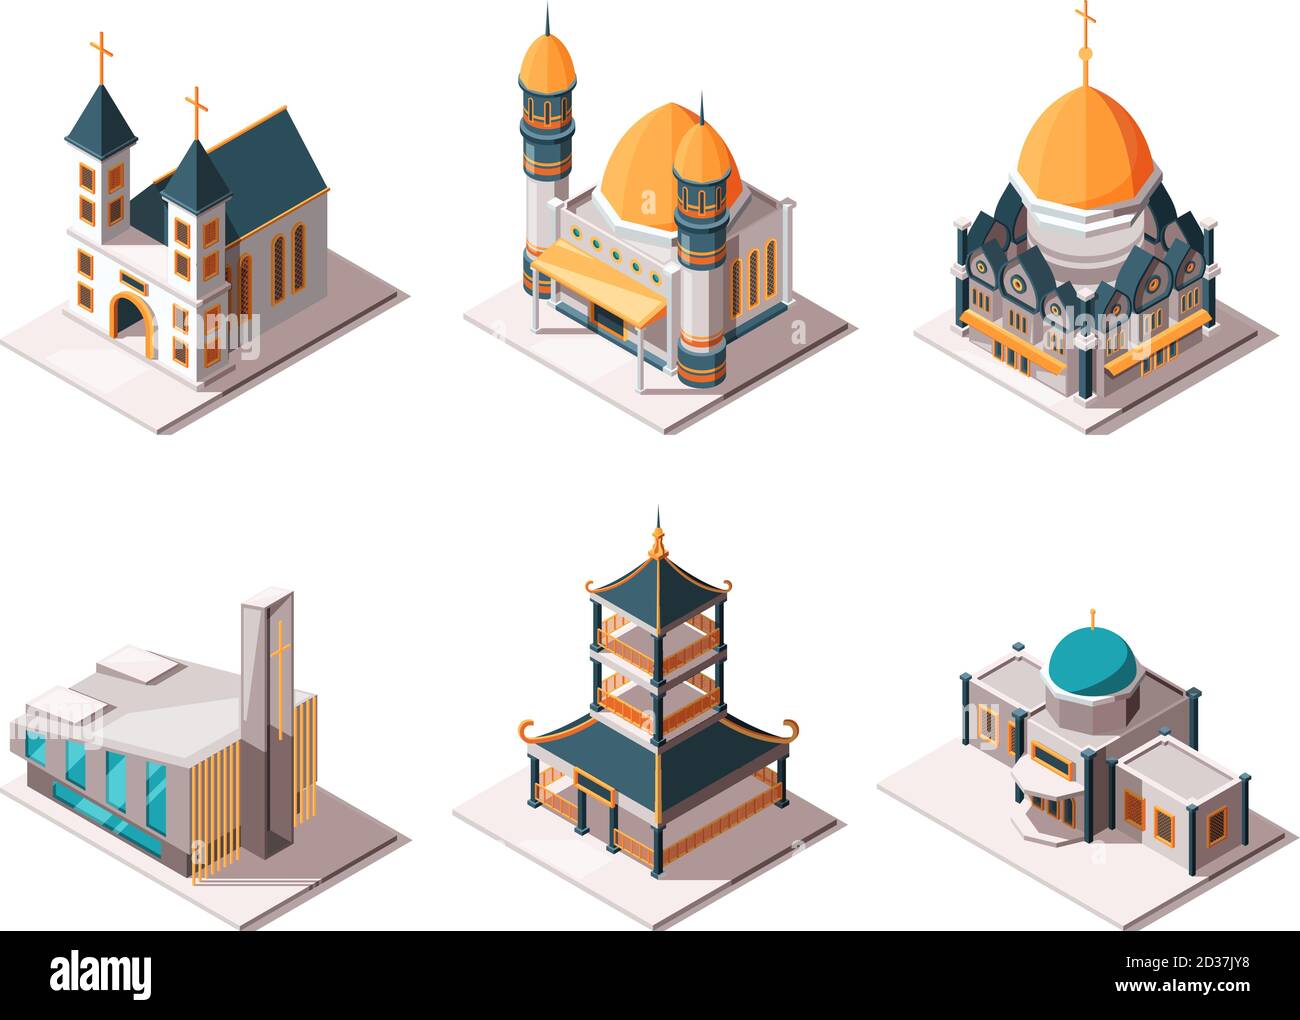 Religion buildings. Islamic mosque arabic architectural objects lutheran catholic christian religion landmarks vector isometric Stock Vector